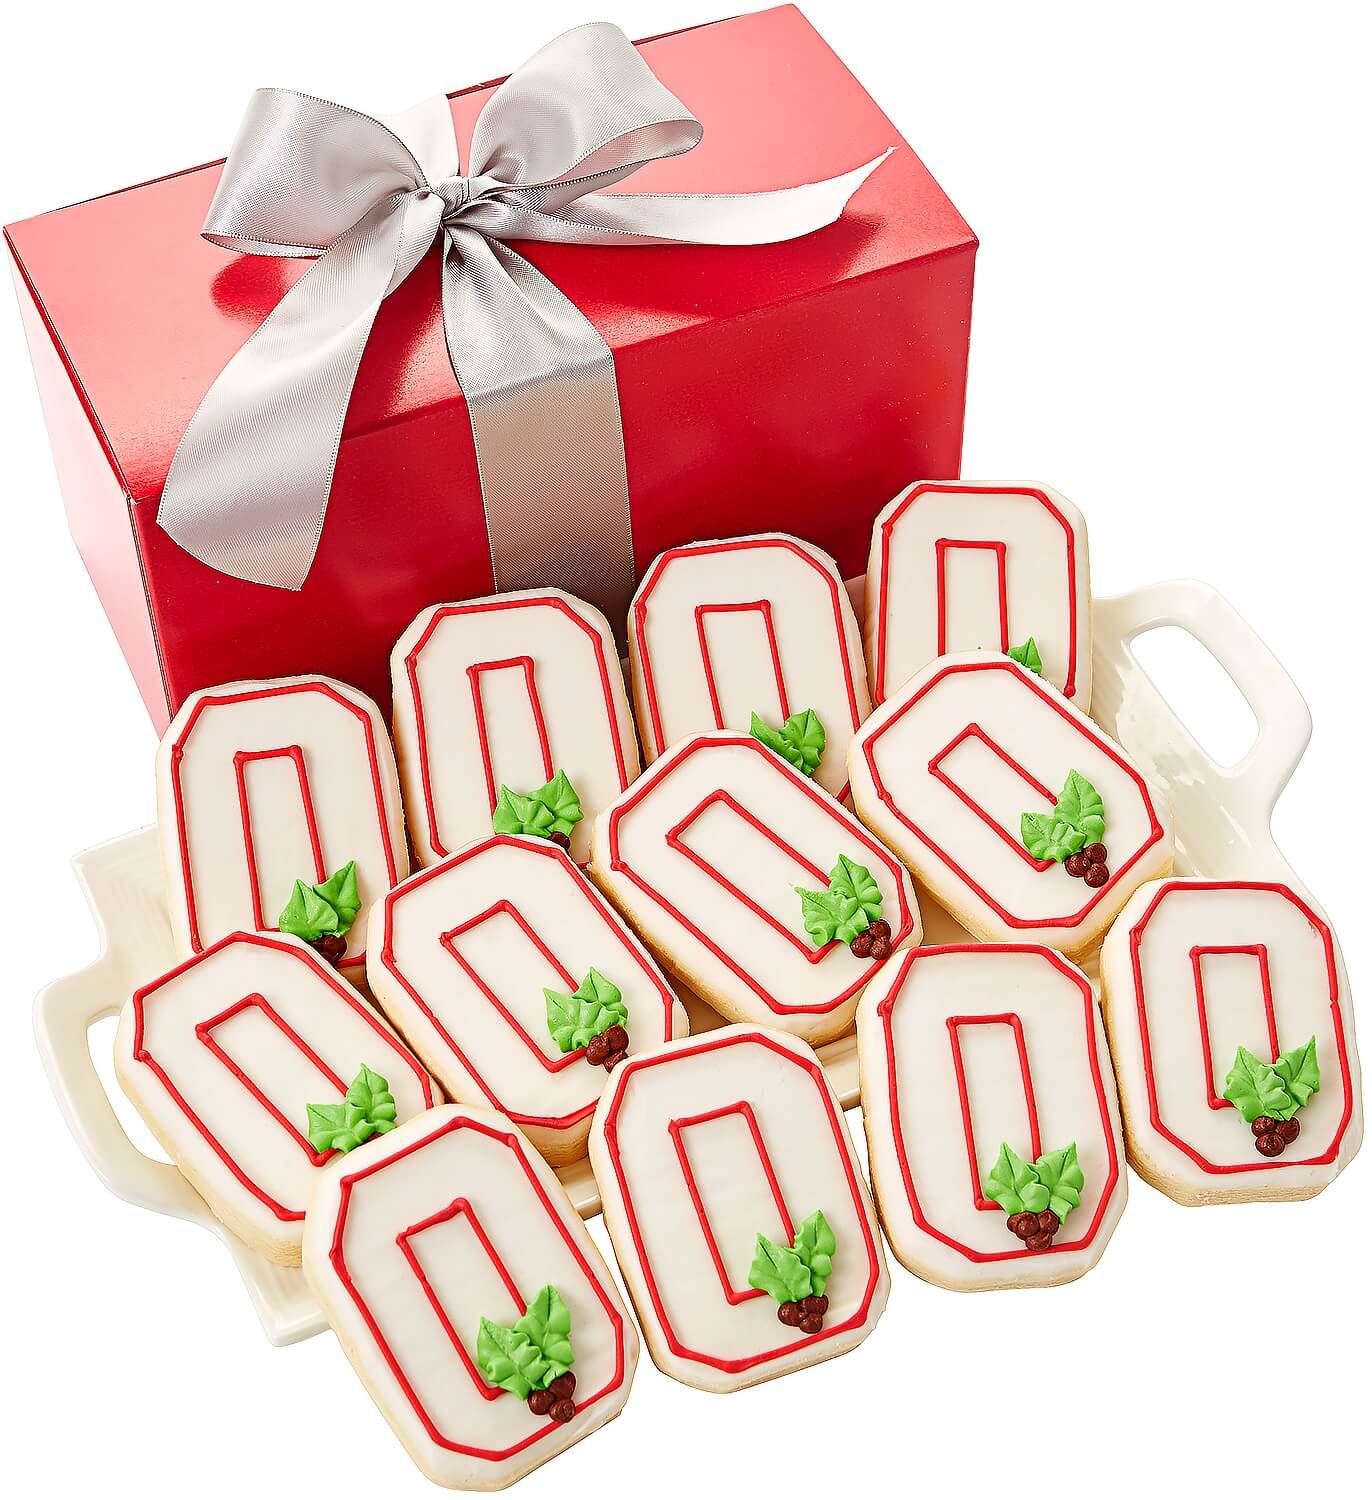 Ohio State University Licensed Block O Cookies Box - Cookie Bouquets1372 x 1500